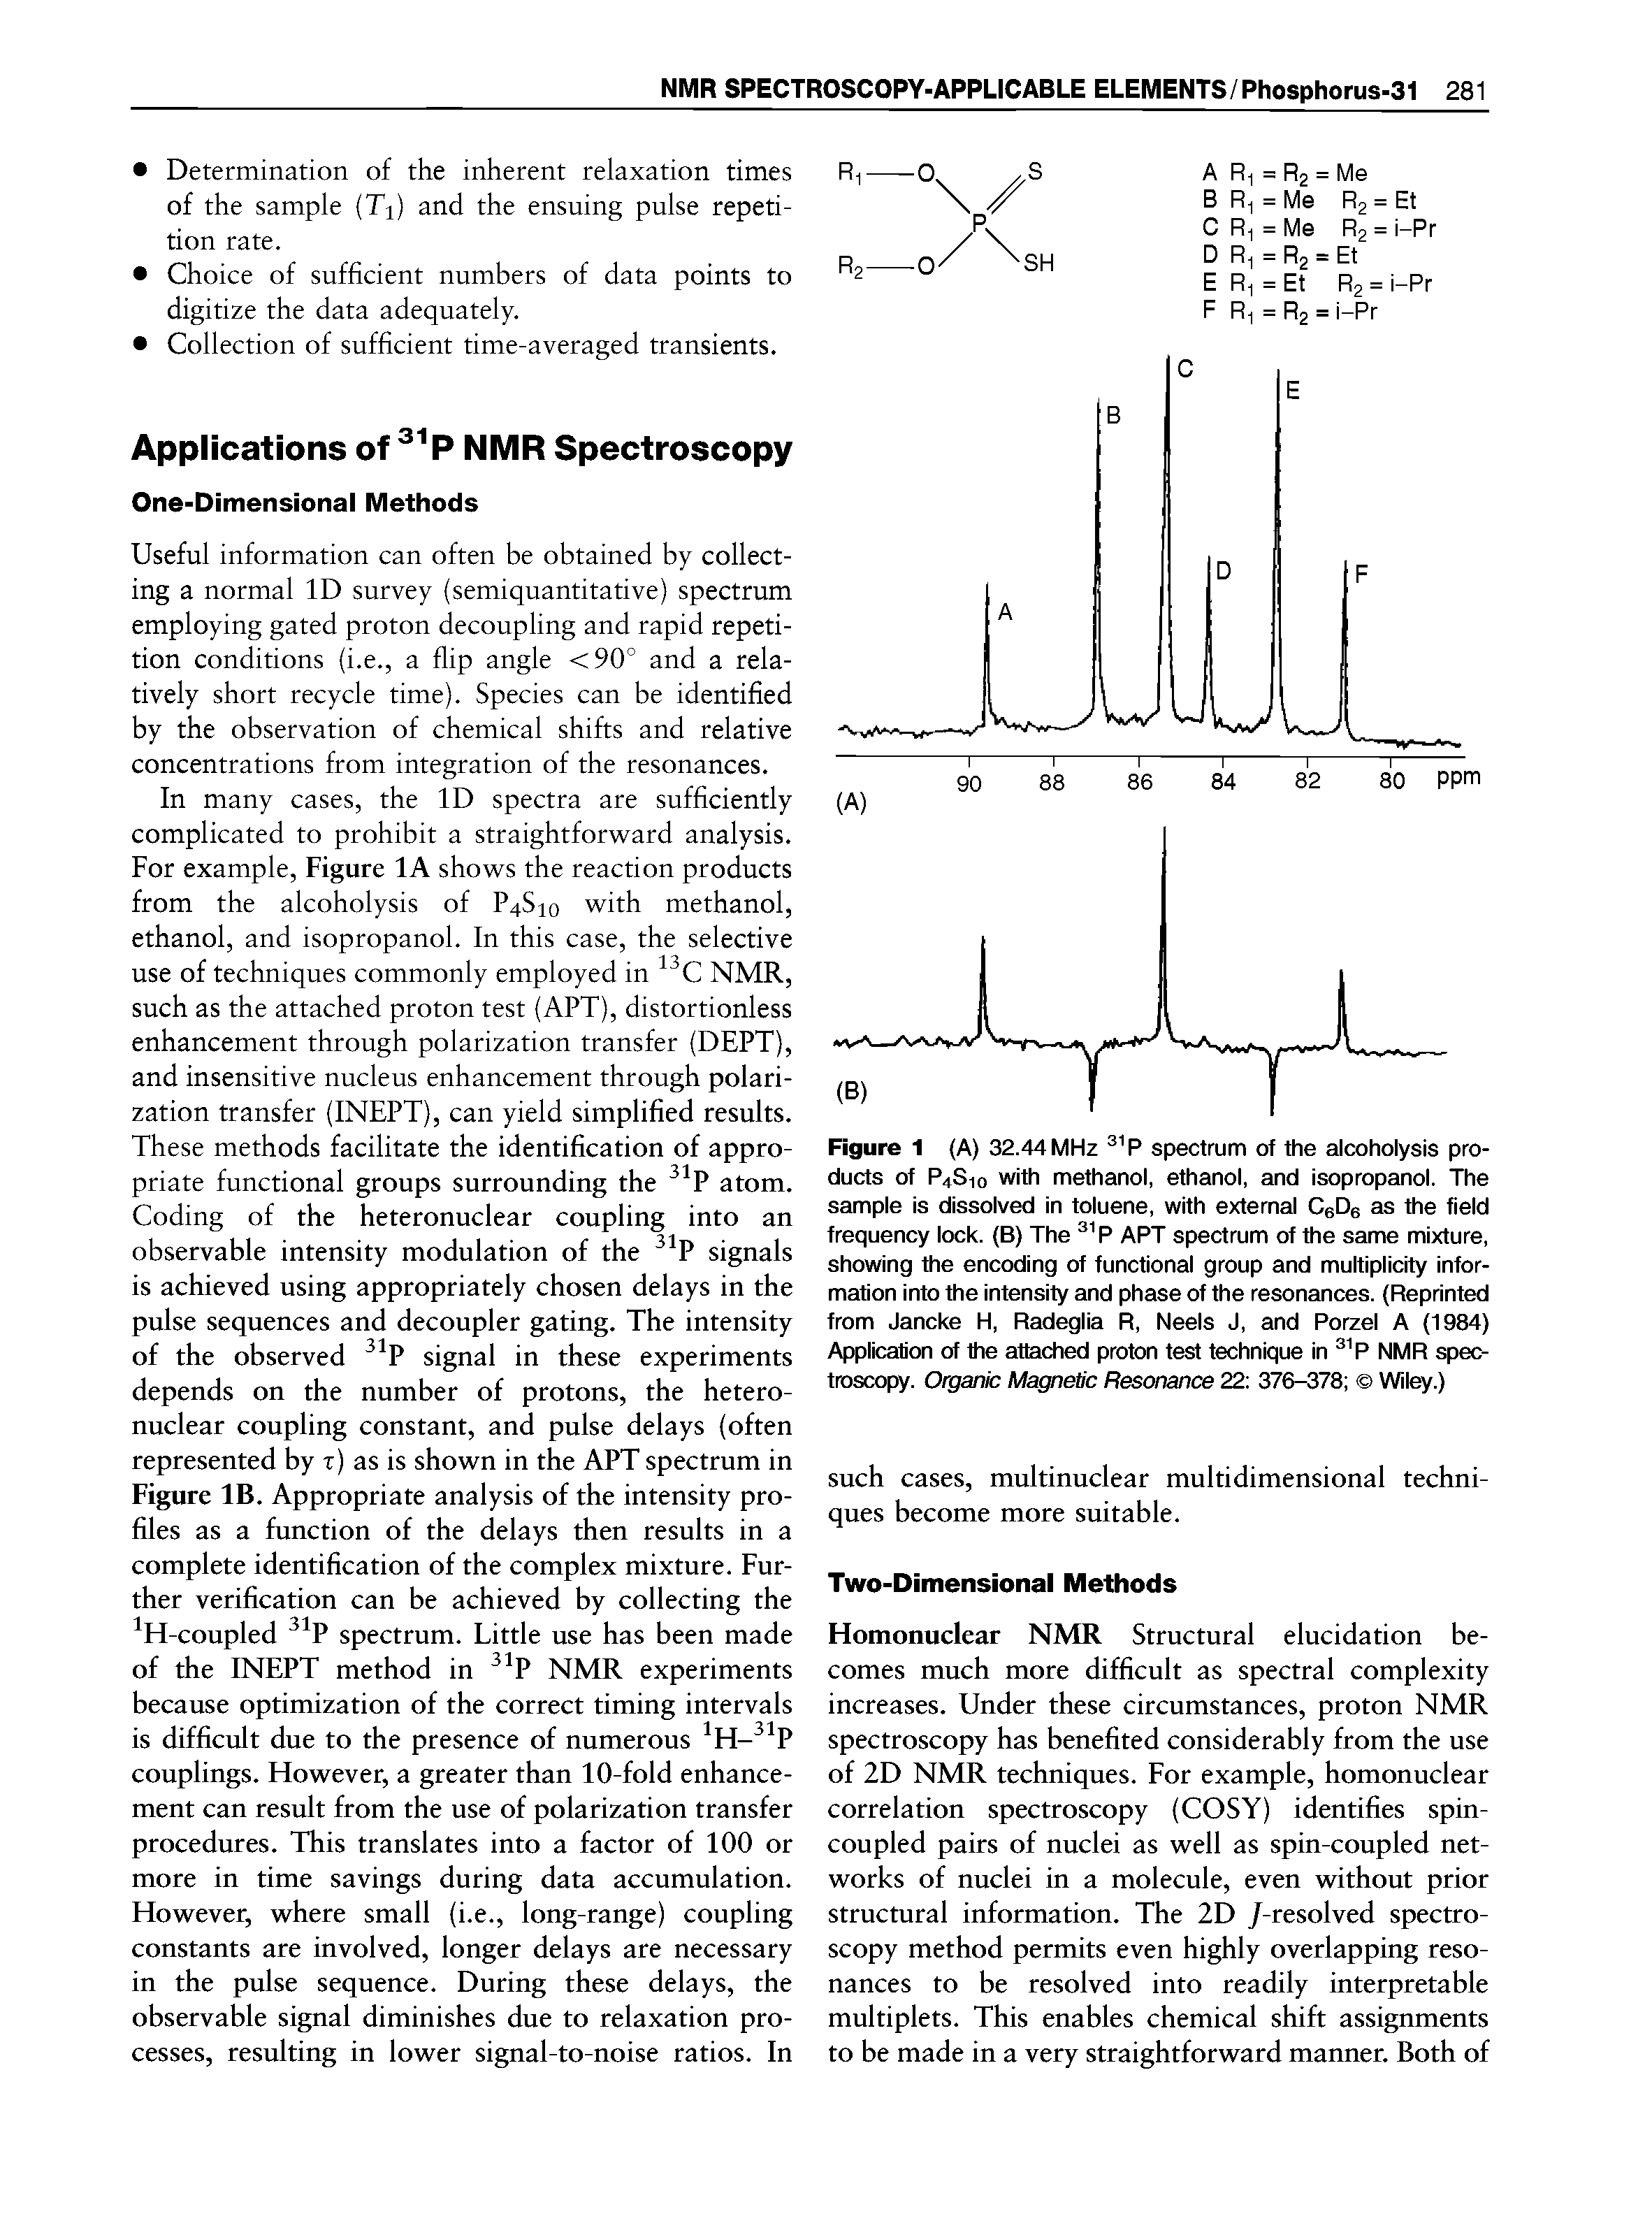 Figure 1 (A) 32.44 MHz spectrum of the alcoholysis products of P4S10 with methanol, ethanol, and isopropanol. The sample is dissolved in toluene, with external CeDe as the field frequency lock. (B) The P APT spectrum of the same mixture, showing the encoding of functional group and multiplicity information into the intensity and phase of the resonances. (Reprinted from Jancke H, Radeglia R, Neels J, and Porzel A (1984) Application of the attached proton test technique in P NMR spectroscopy. Organic Ma etic Resonance 22 376-378 Wiley.)...